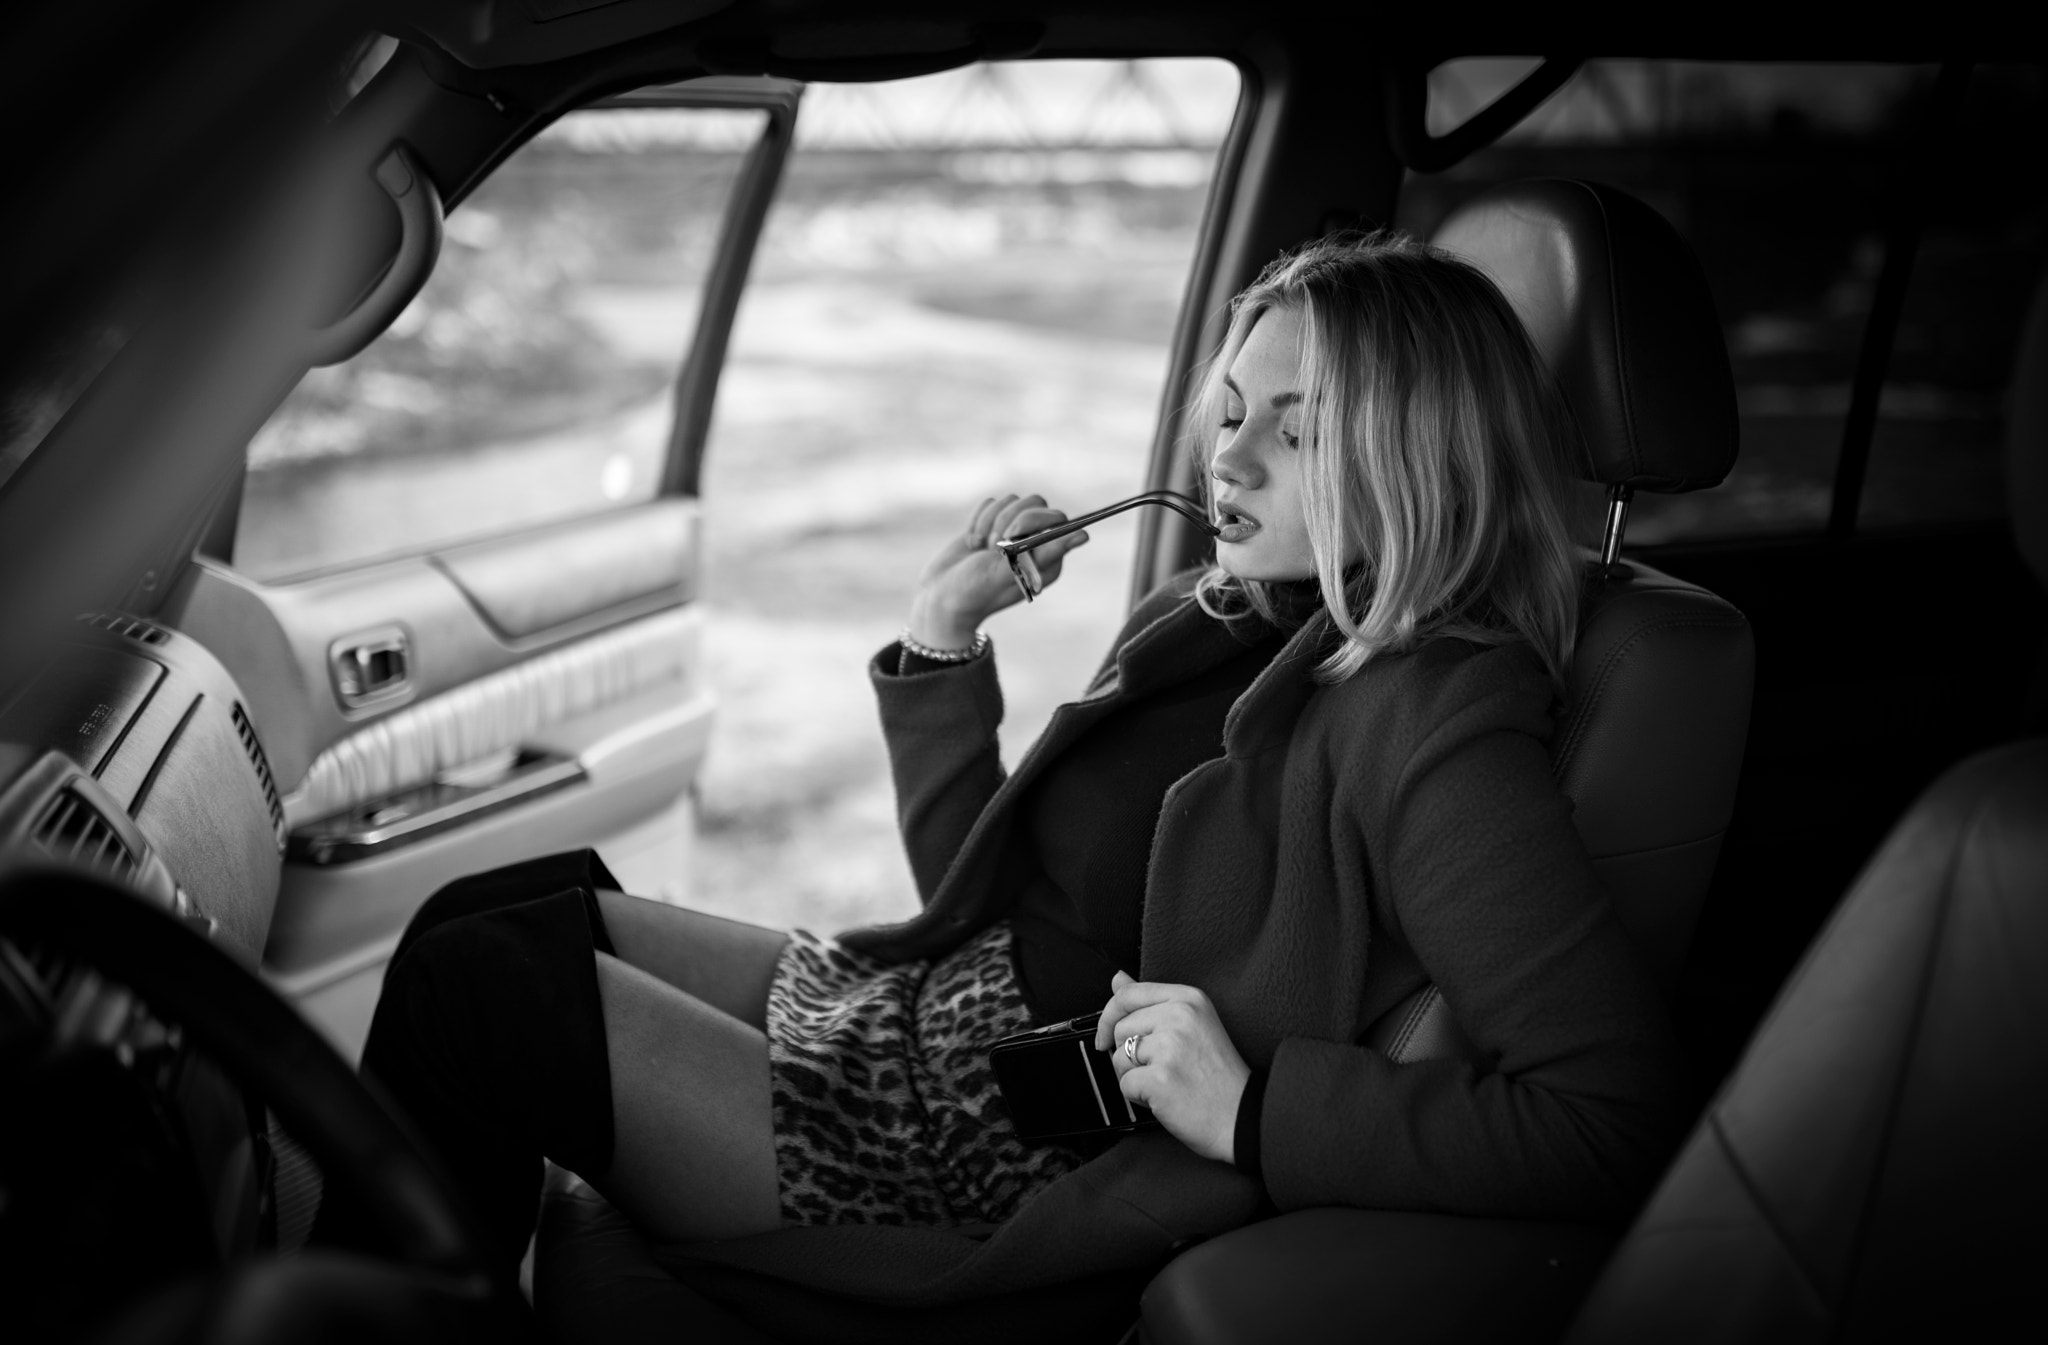 People 2048x1345 Aleksei Gornistov women with cars women black coat knee-high boots car interior glasses